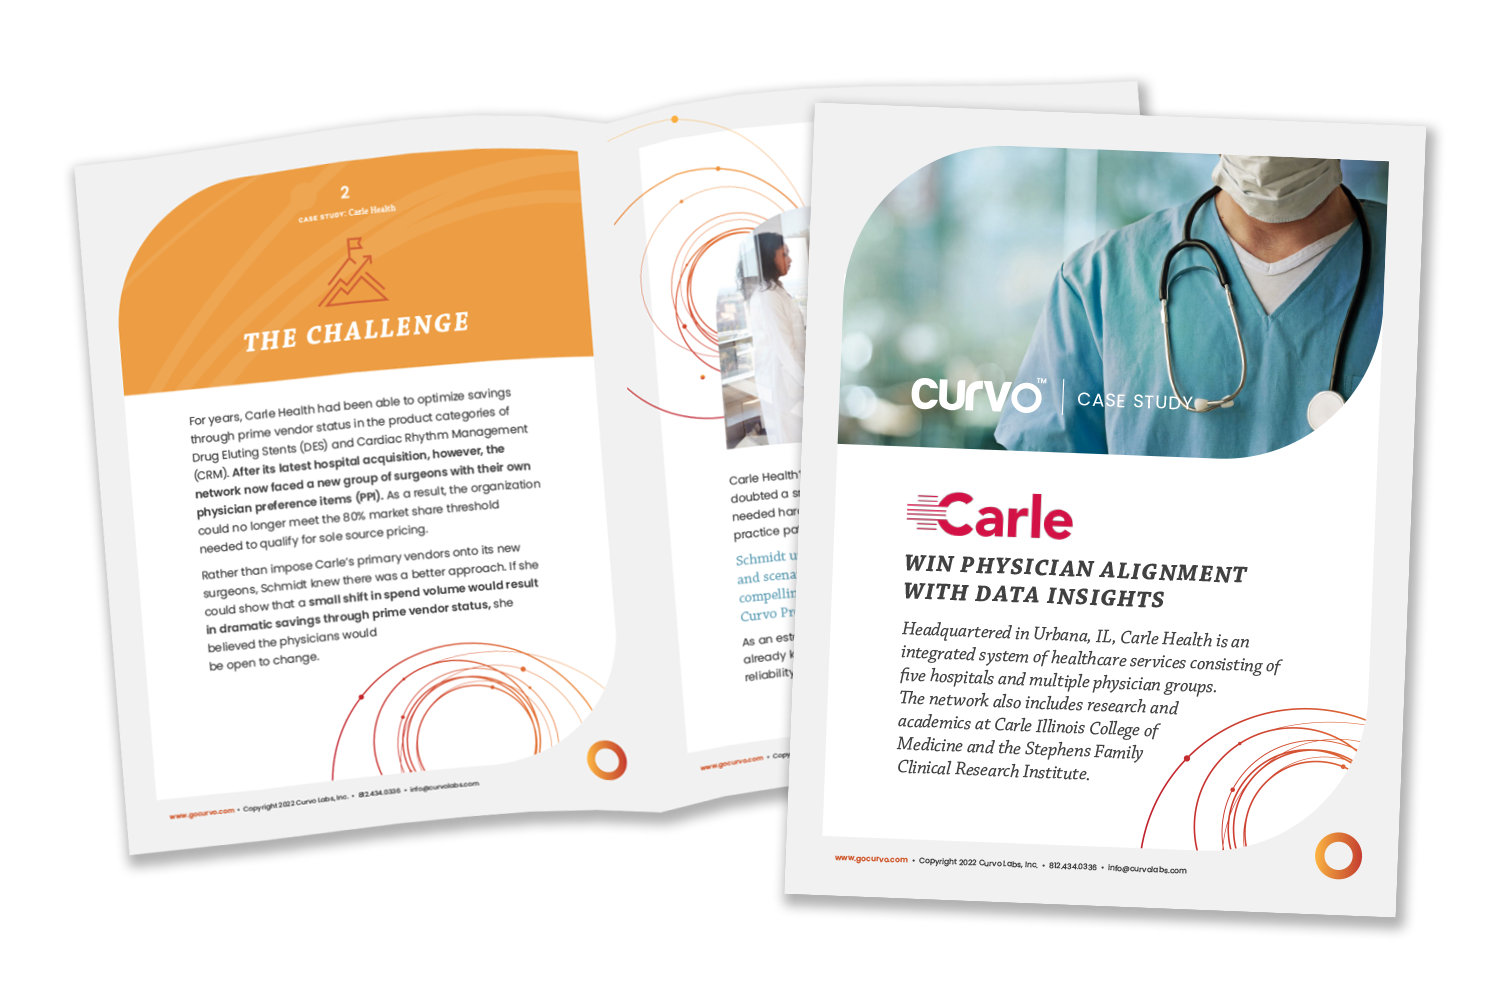 Carle Health: How Data Insights Win Physician Alignment